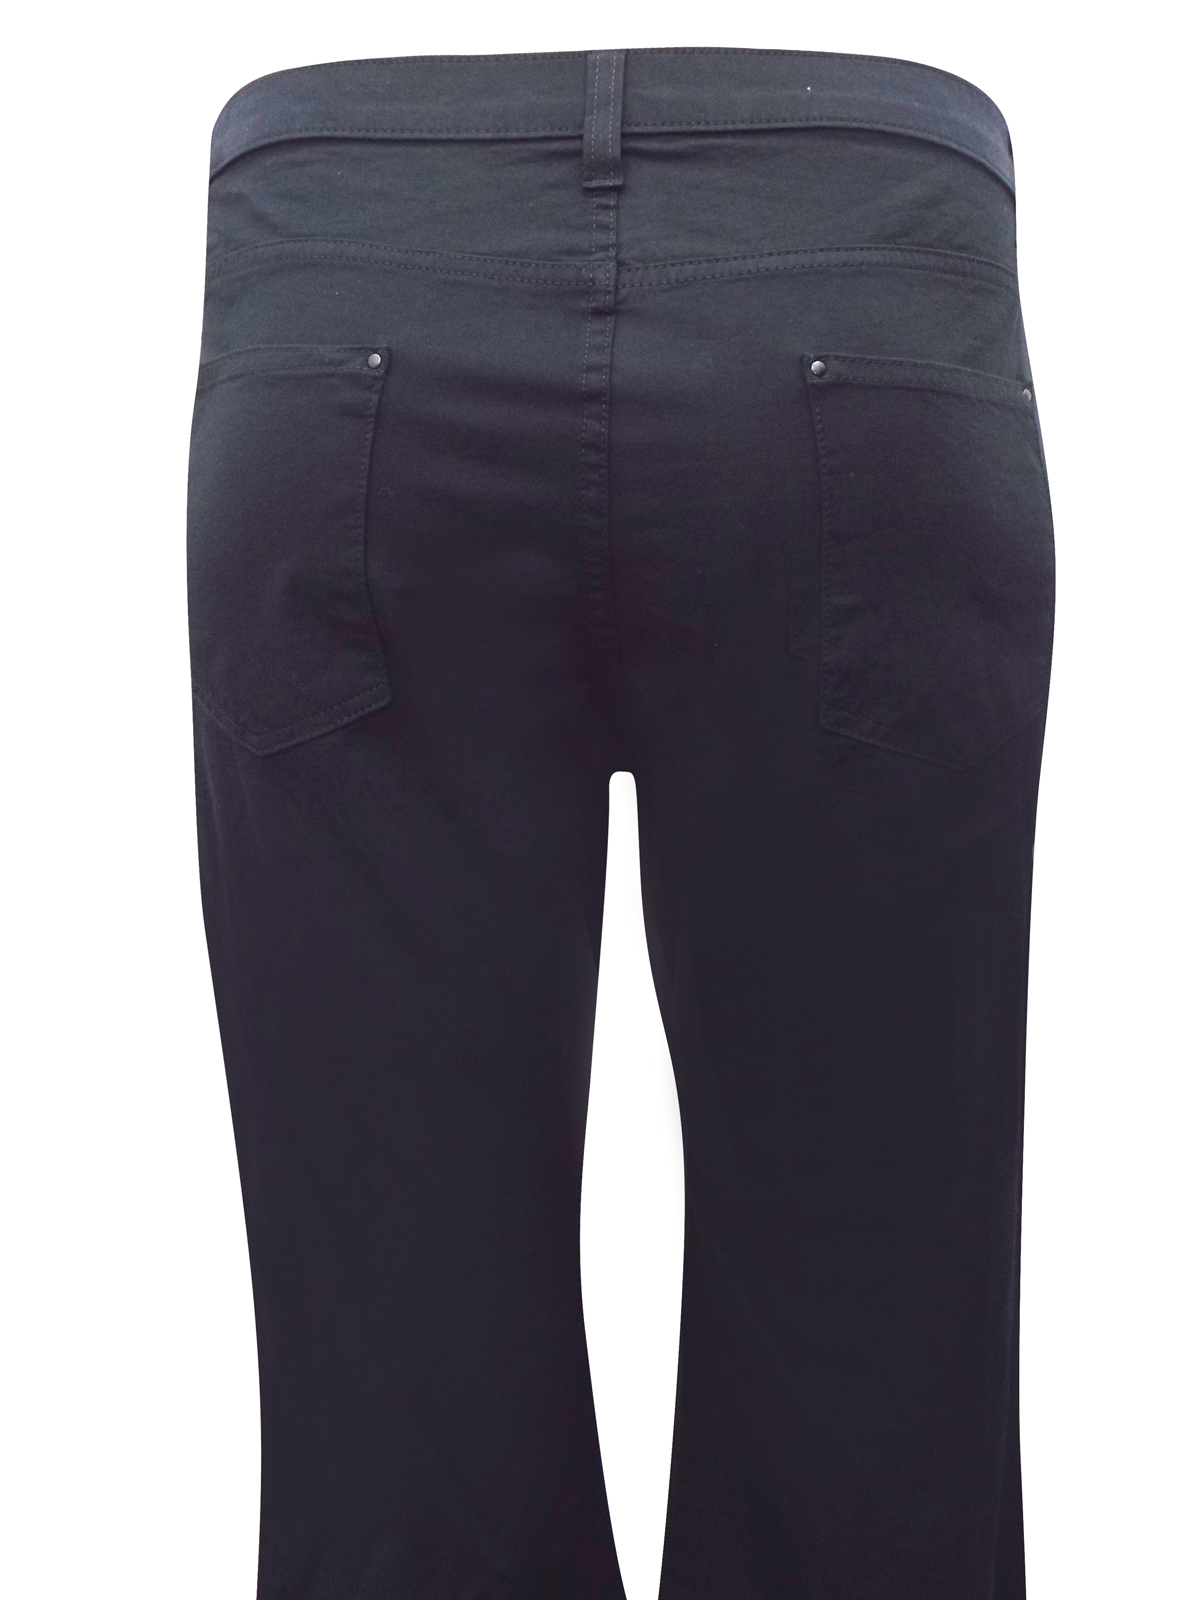 Marks and Spencer - - M&5 BLACK Straight Leg 2-Way Stretch Trousers ...